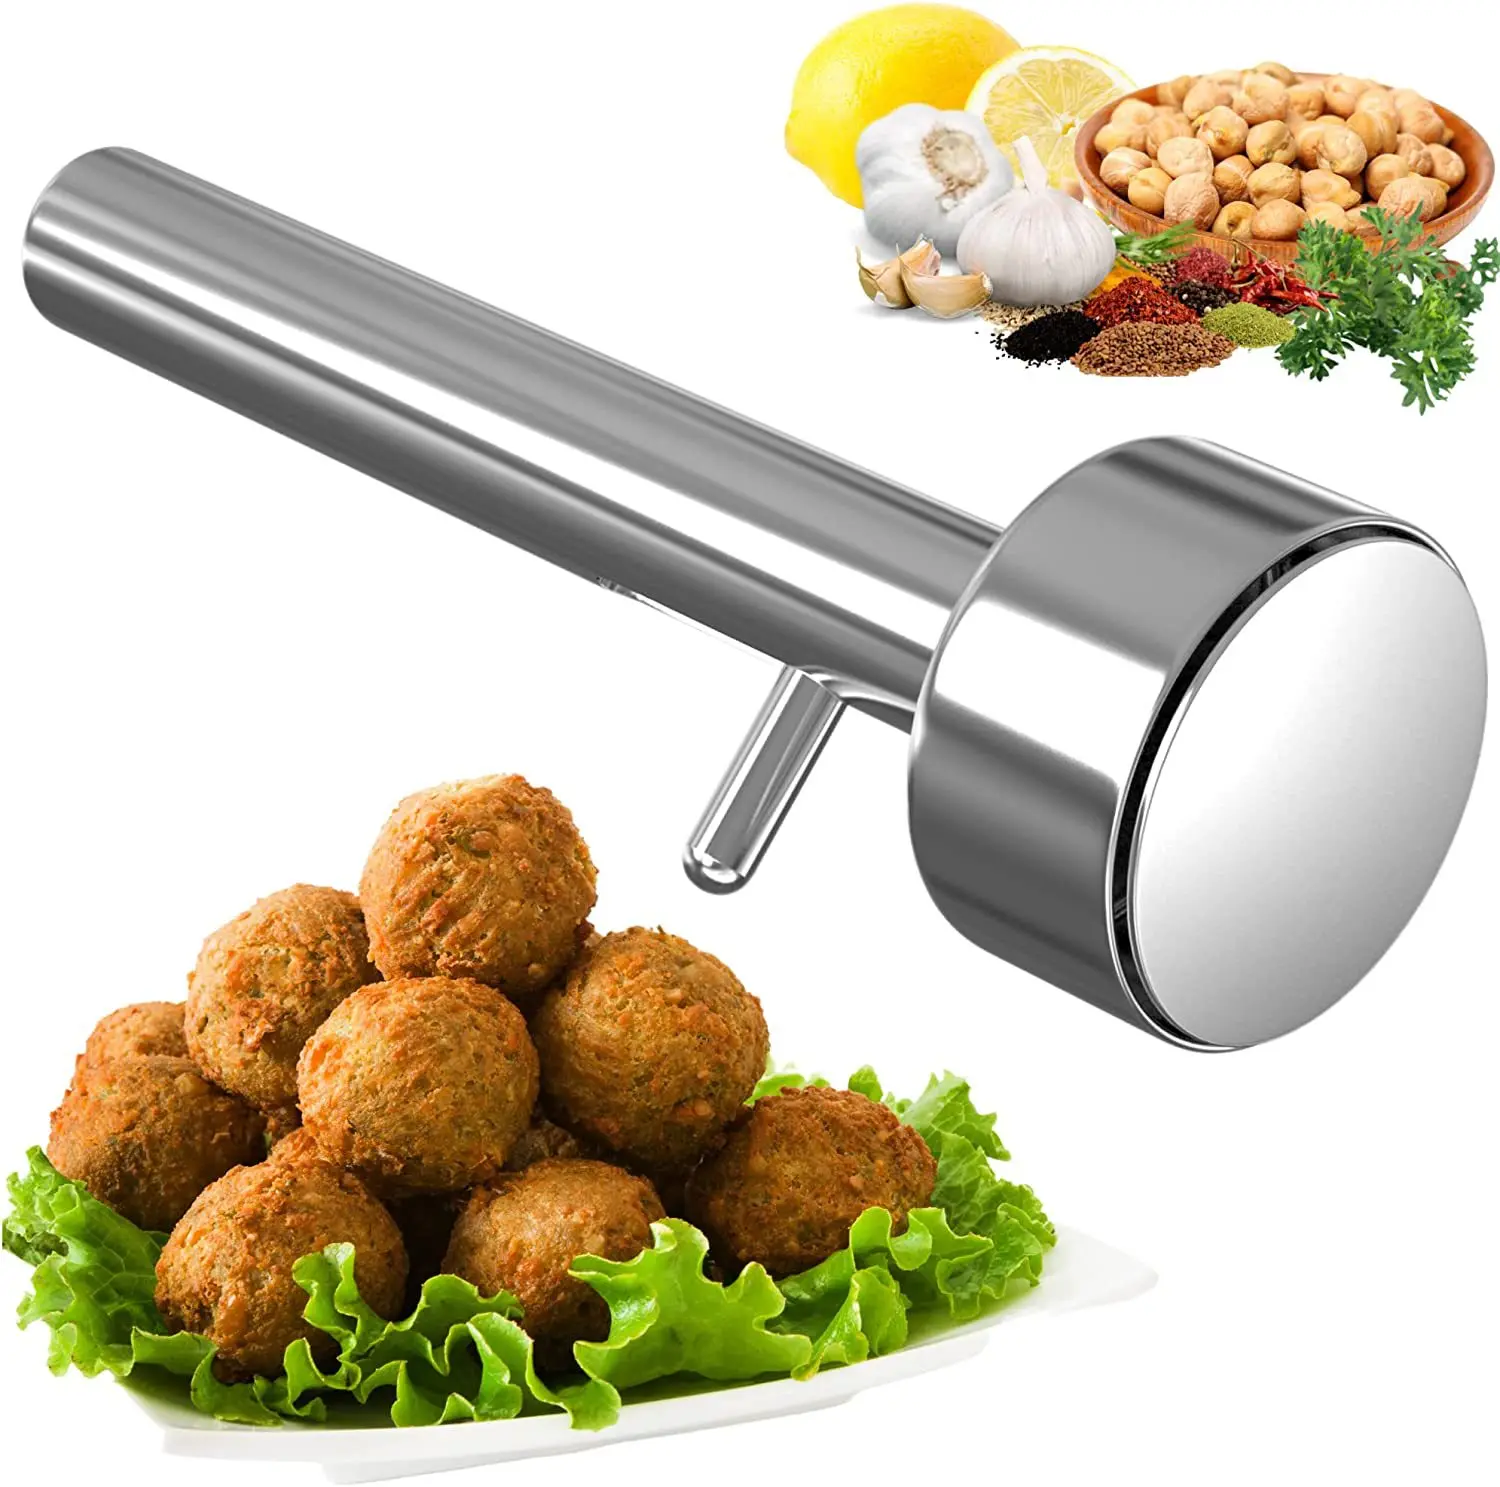 

New Meatball Maker Large Falafel Ball Making Scoop Mold Kitchen Tool Pal Meat Pressing Gadgets Stainless Steel Meatball Machine